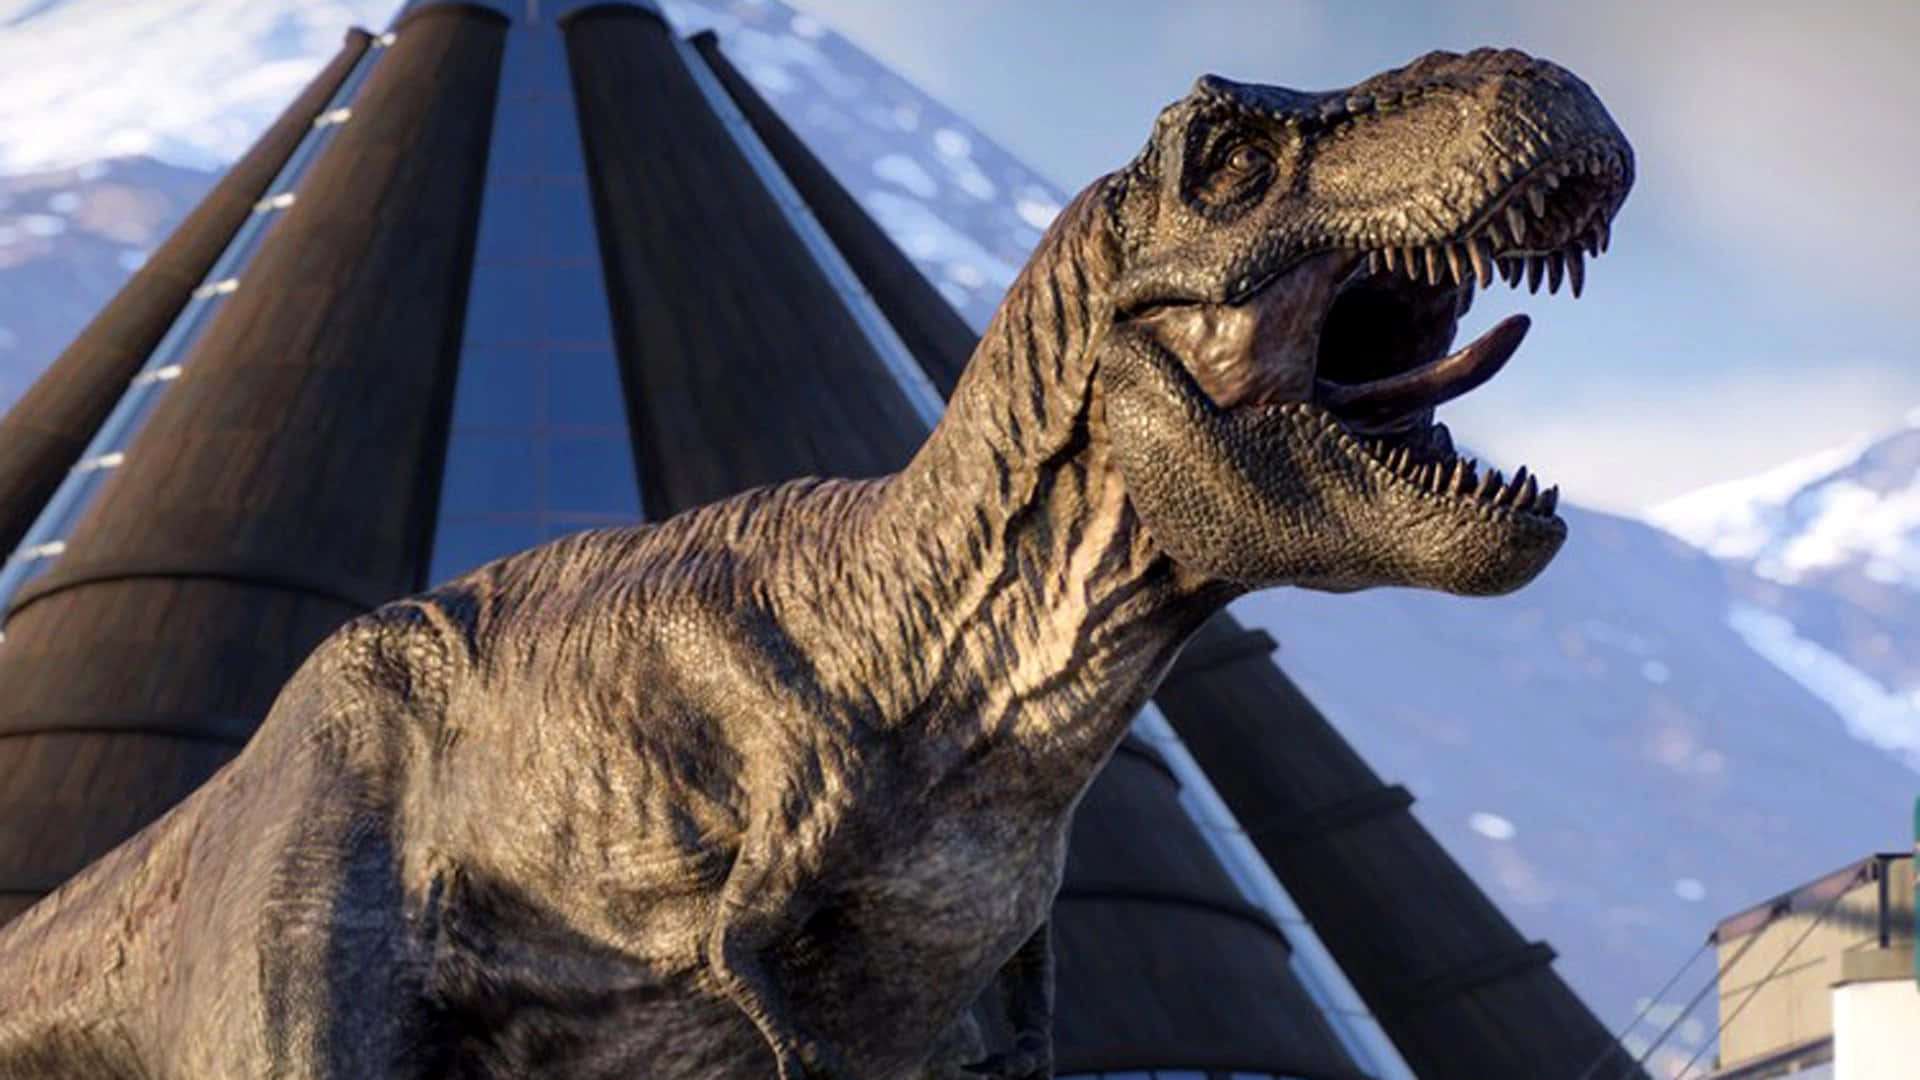 The adventure begins in the new Jurassic World